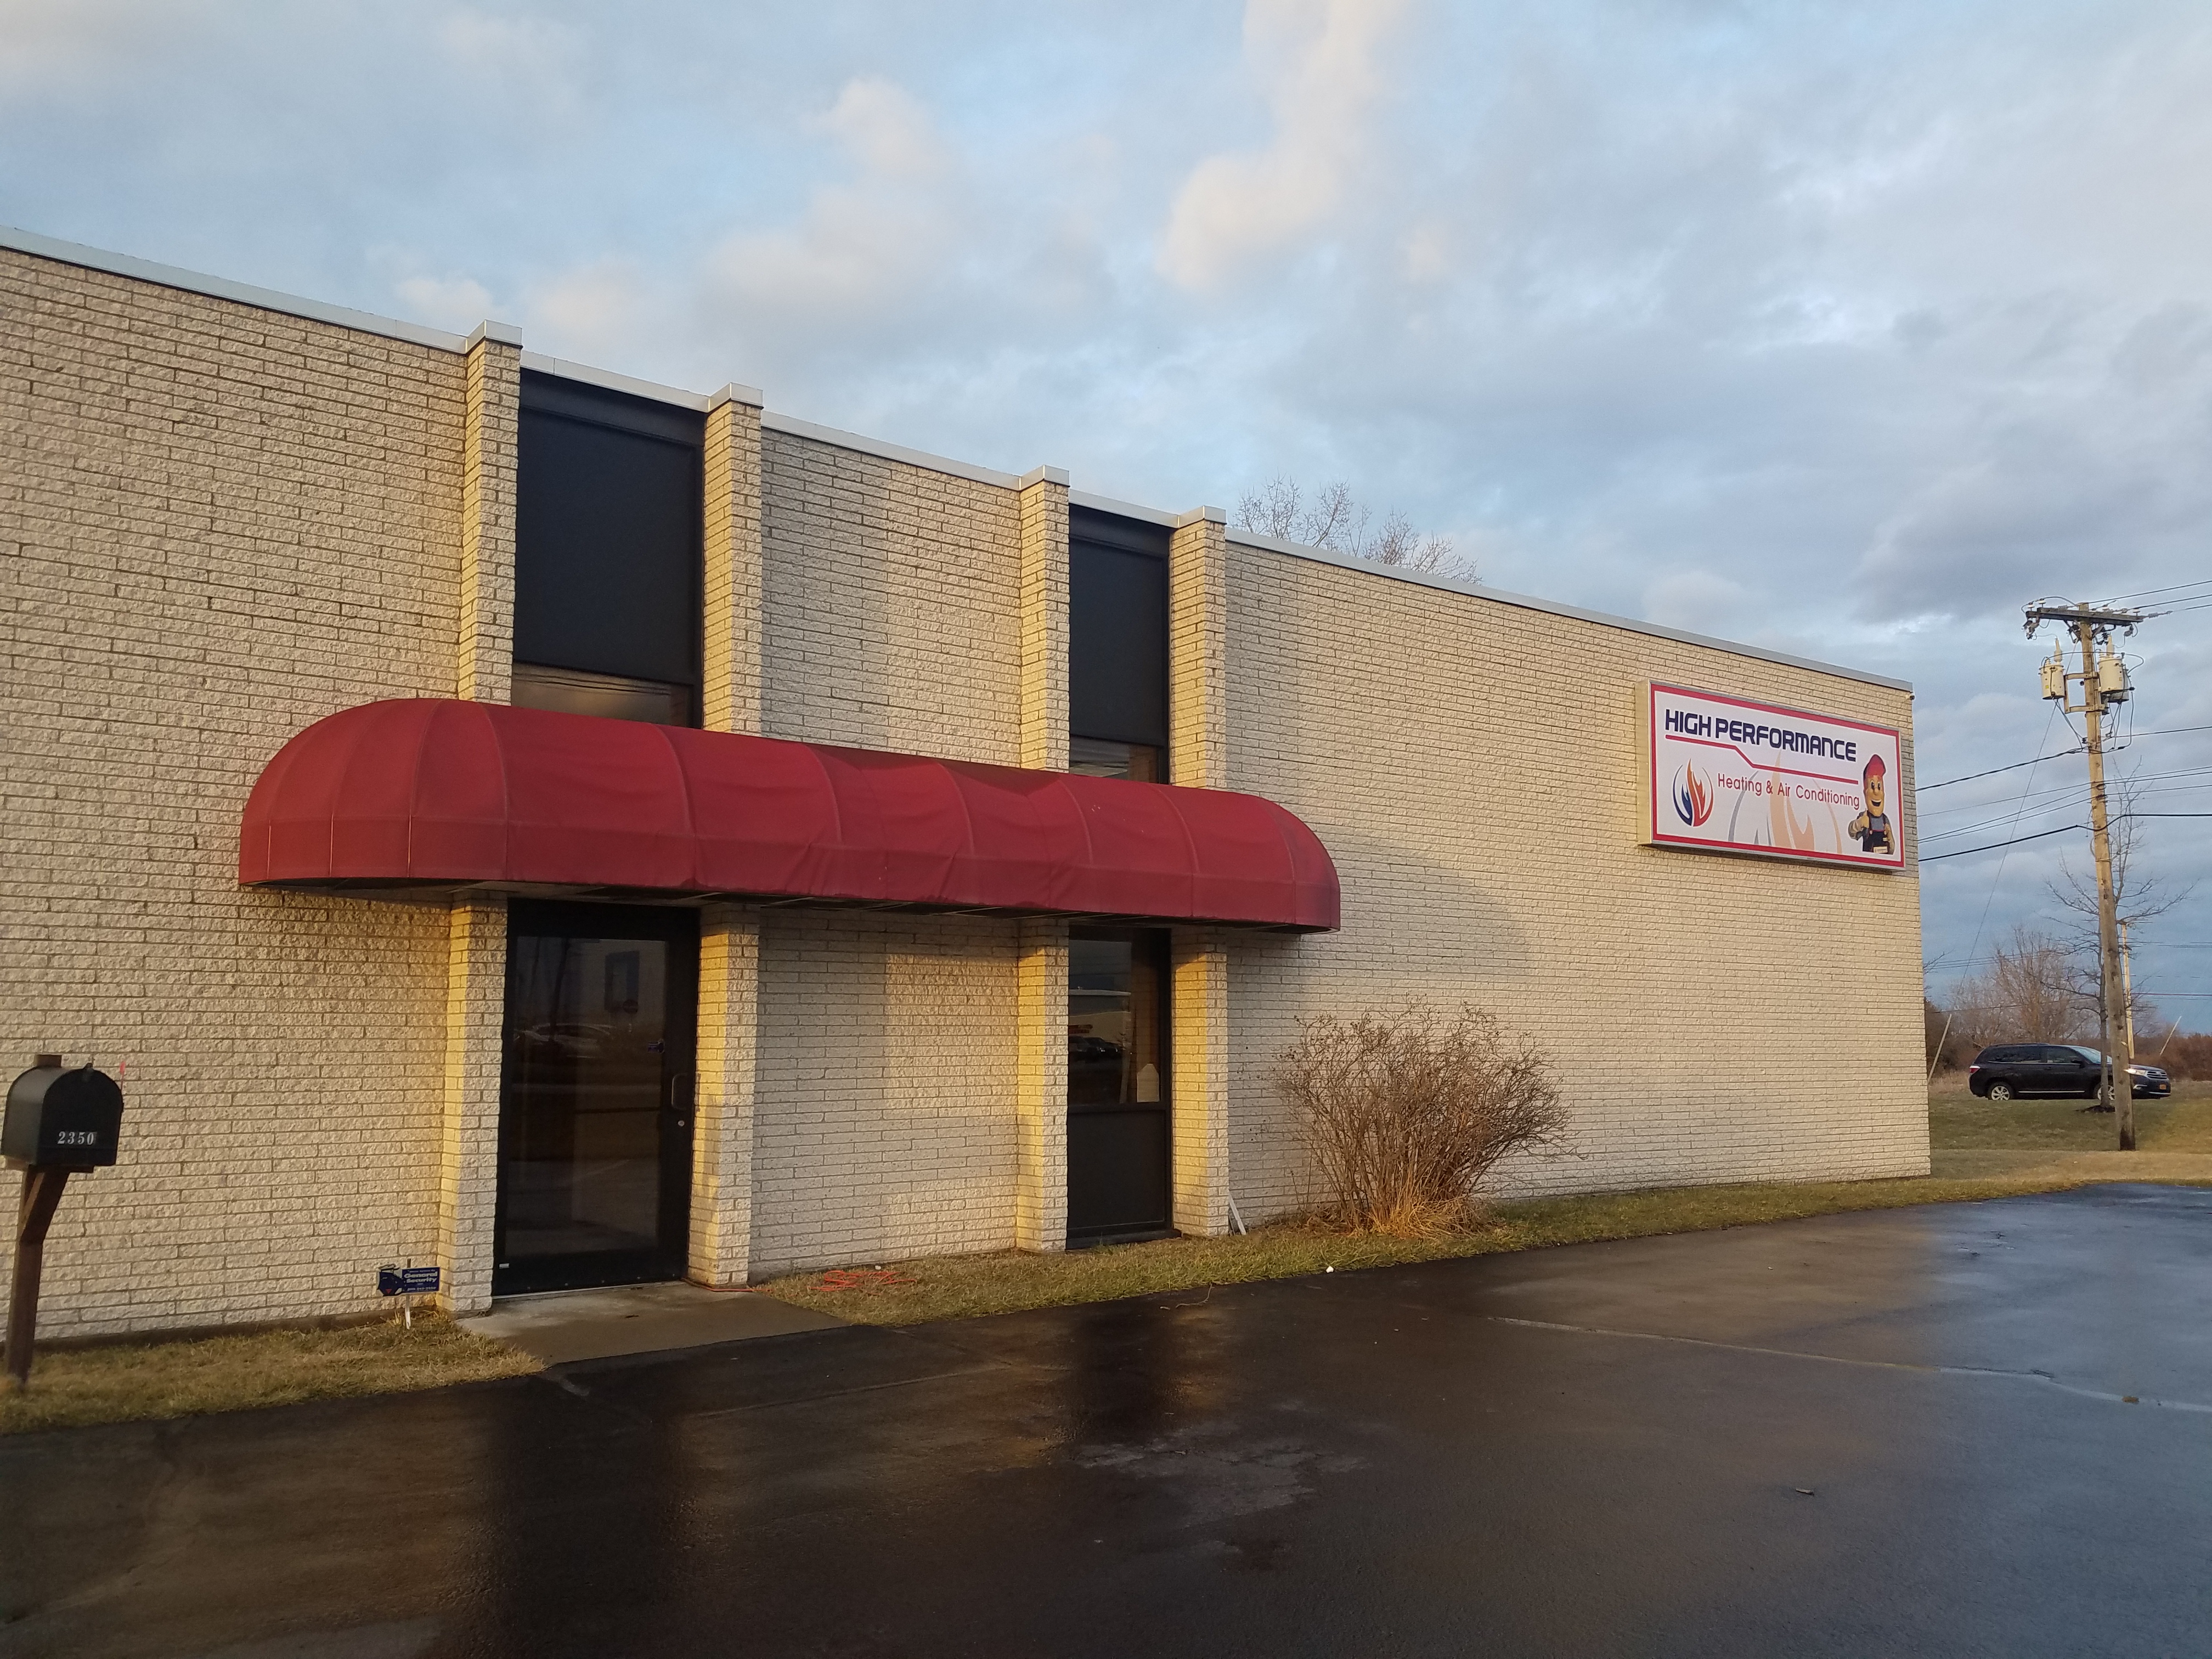 Come Visit our New High Performance Heating Location to serve all of your hvac needs, 2350 Brighton Henrietta Town Line Rd-Rochester NY 14623